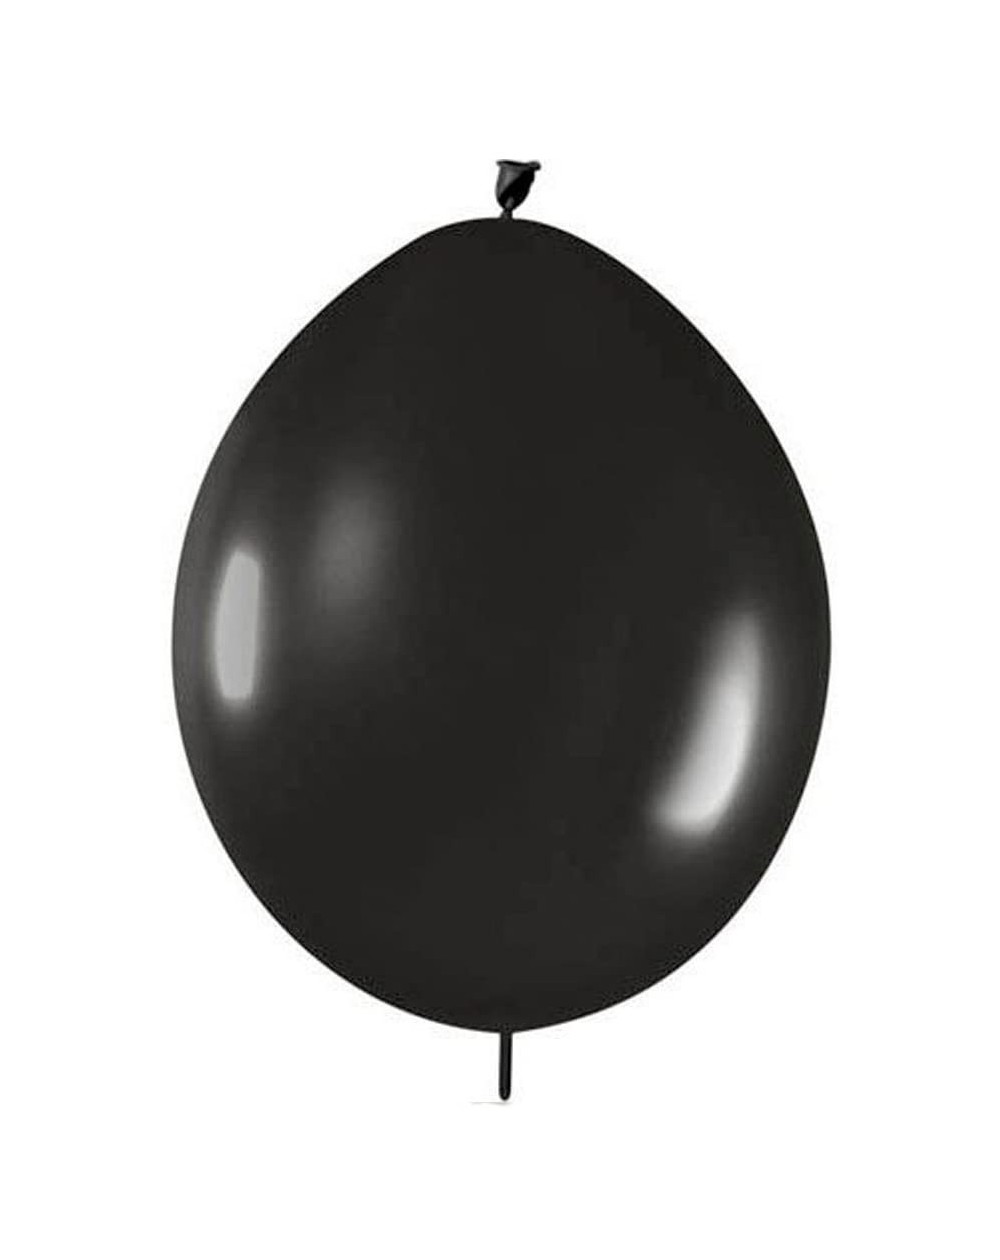 Balloons Latex Link Balloons Link-o-Loon Balloons Needle Tail Balloons- 12in Black (Set of 30) - Black (Set of 30) - CU12GK4I...